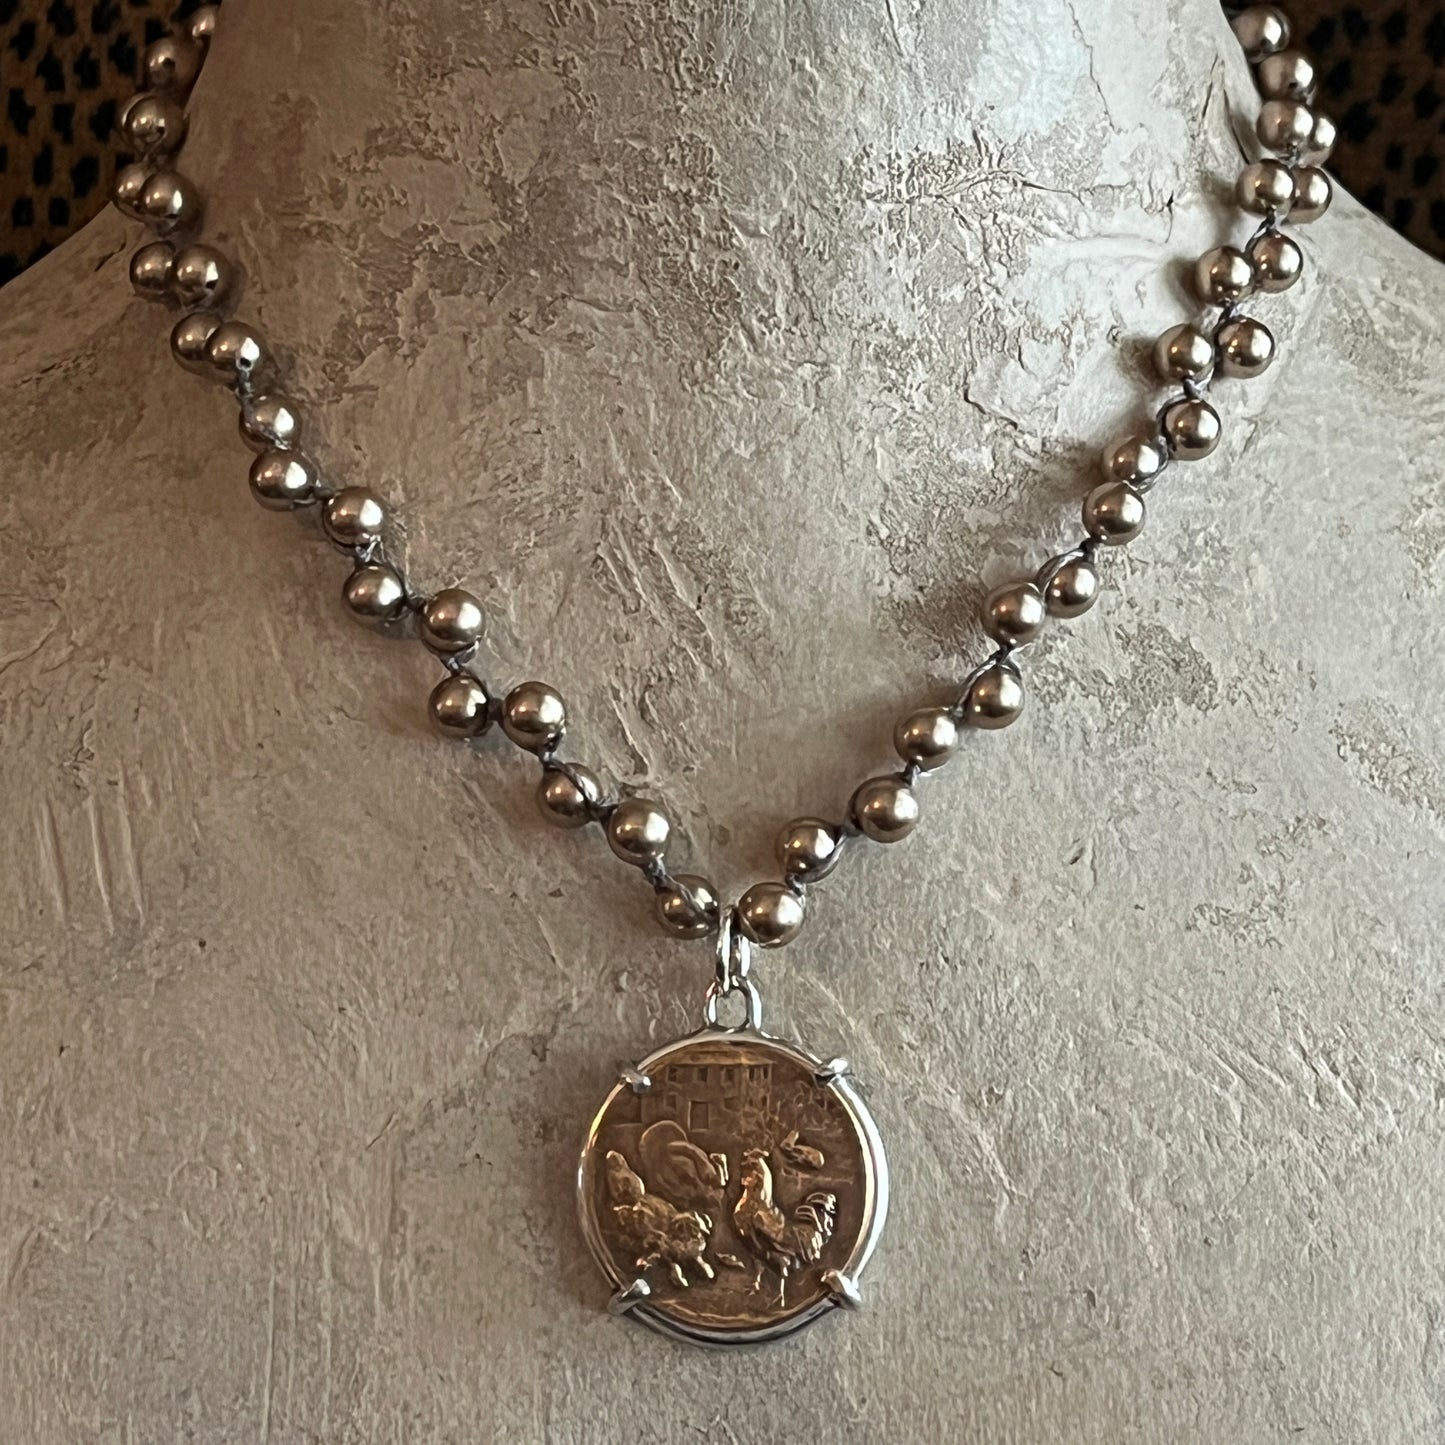 1935 Florence Poultry Breeding Awards Medal on Pearl Necklace